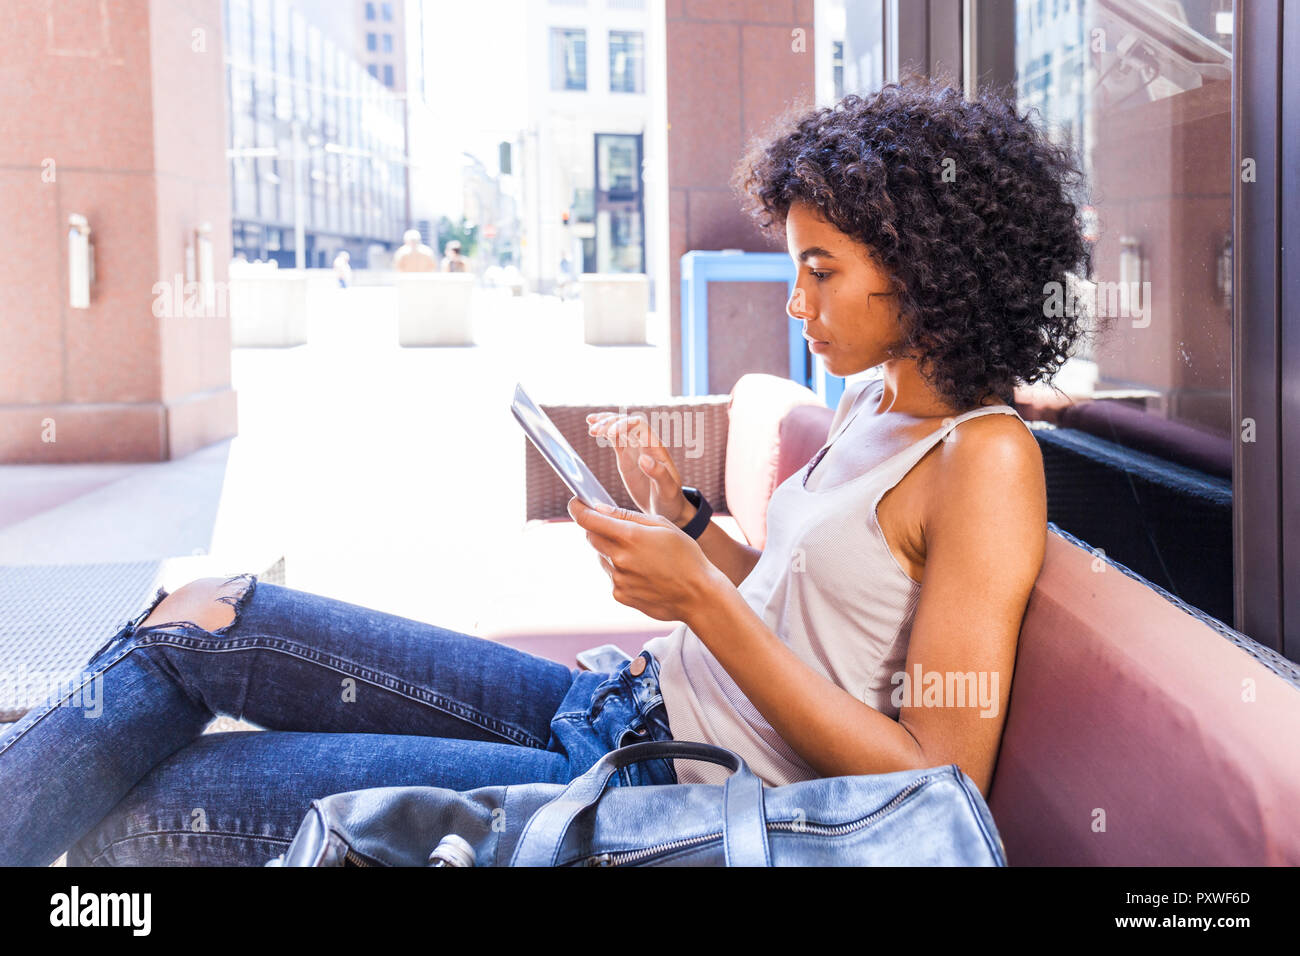 Young woman sitting at sidewalk cafe using digital tablet Stock Photo